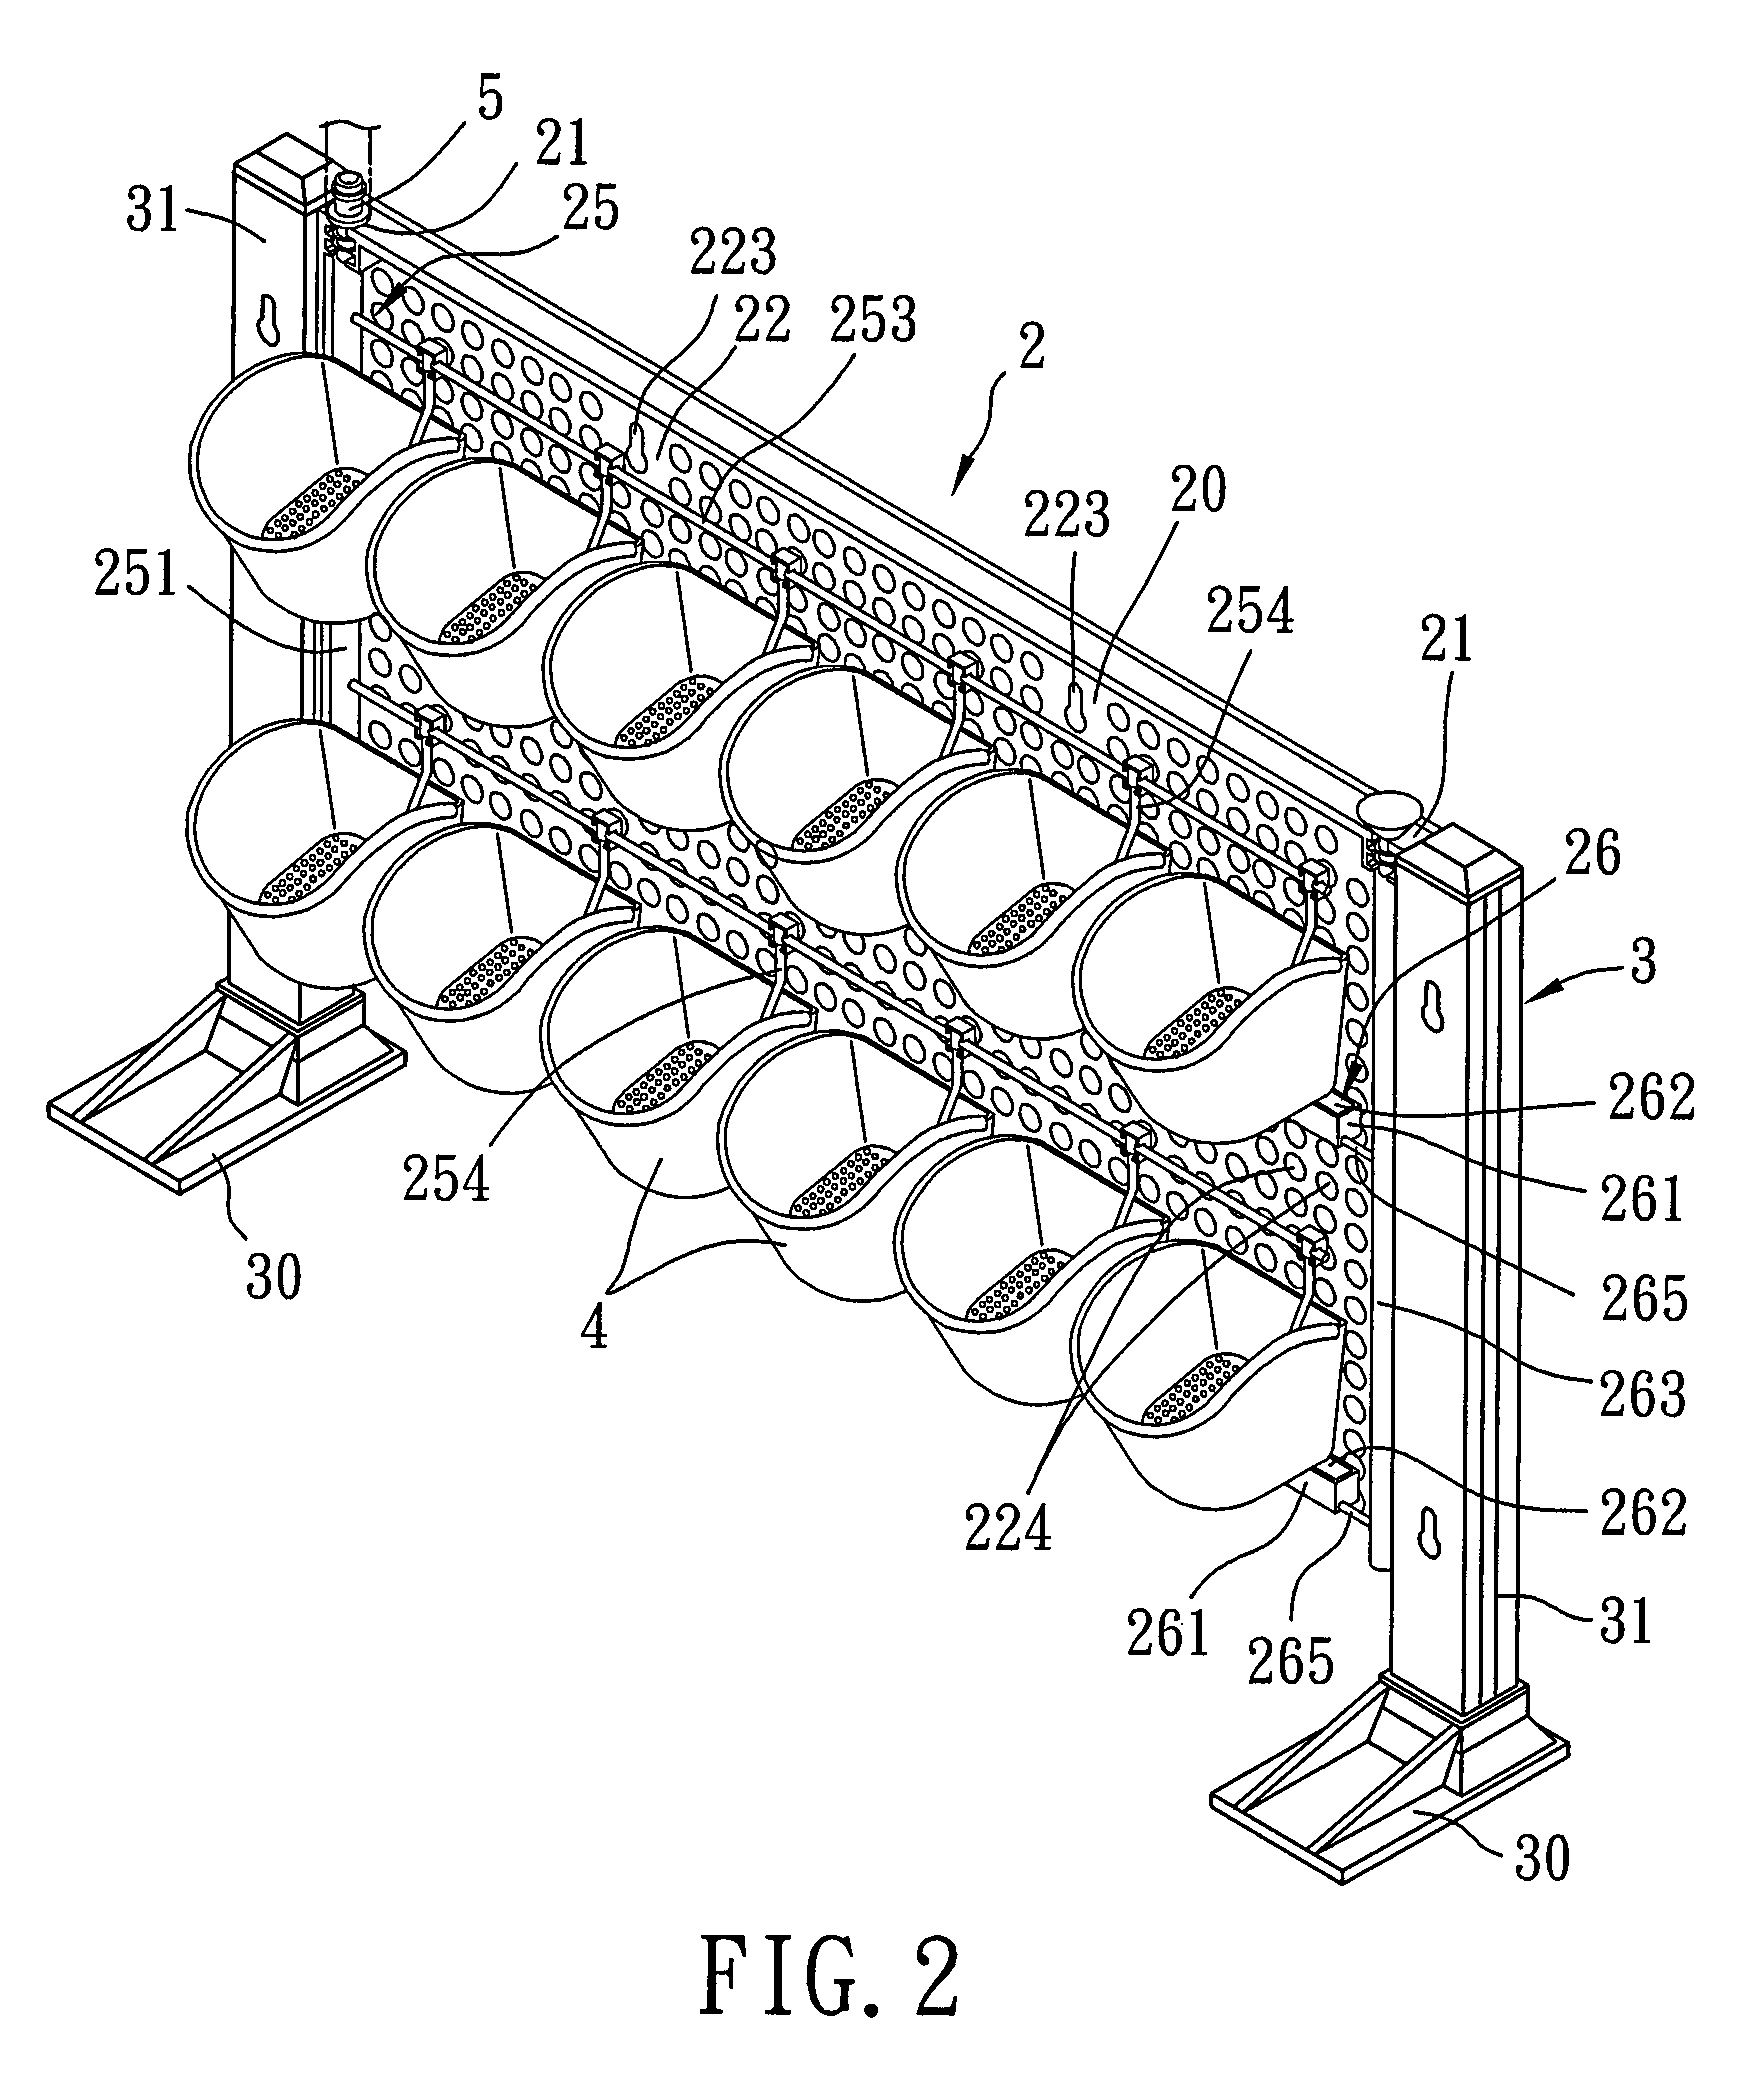 Green wall planting support apparatus